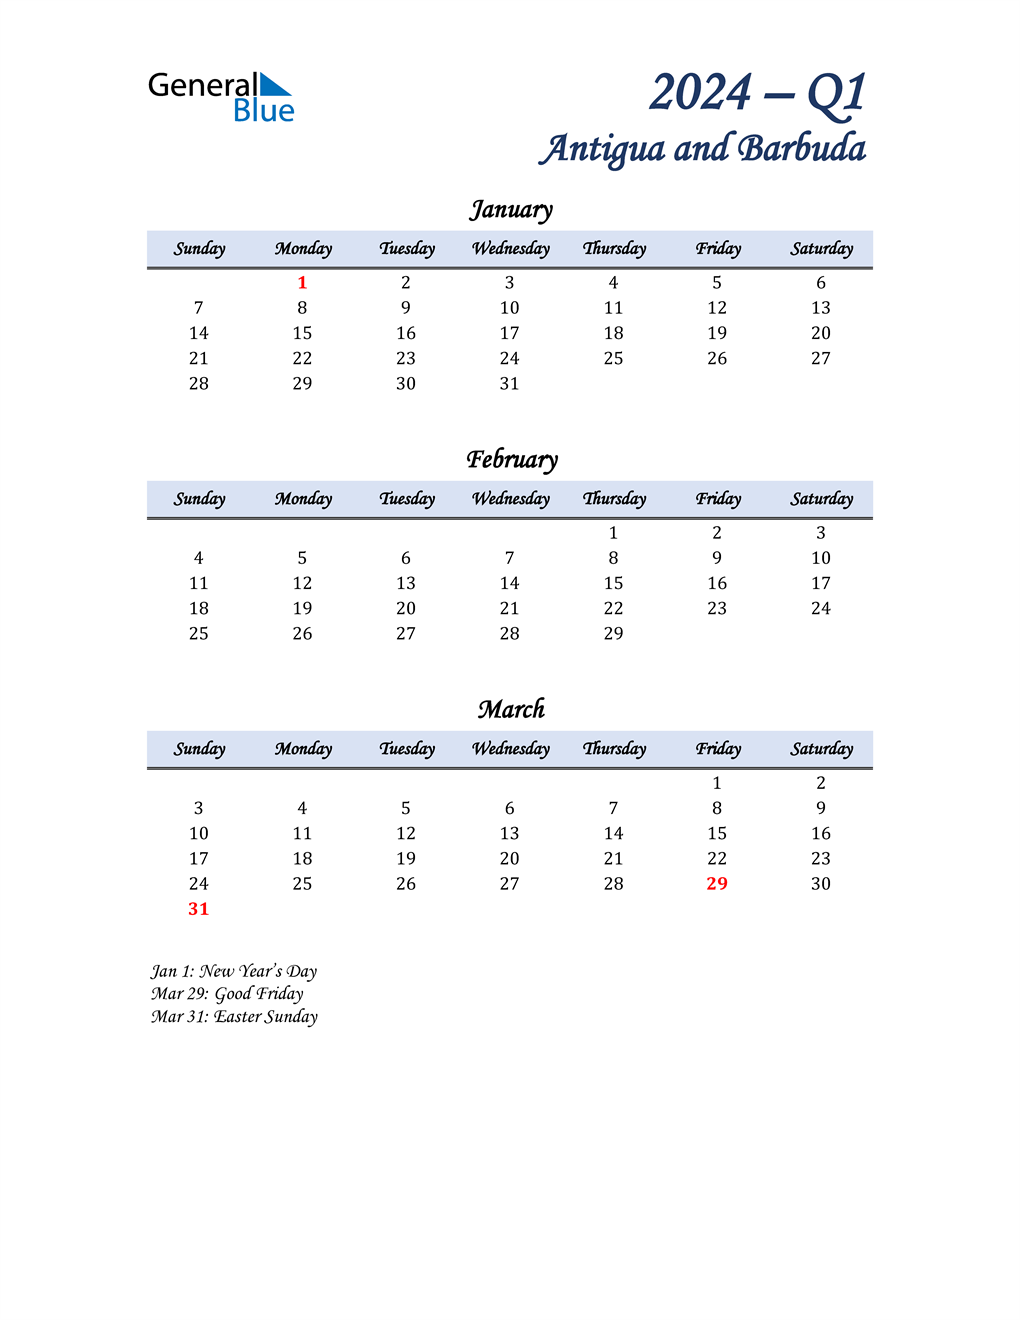  January, February, and March Calendar for Antigua and Barbuda